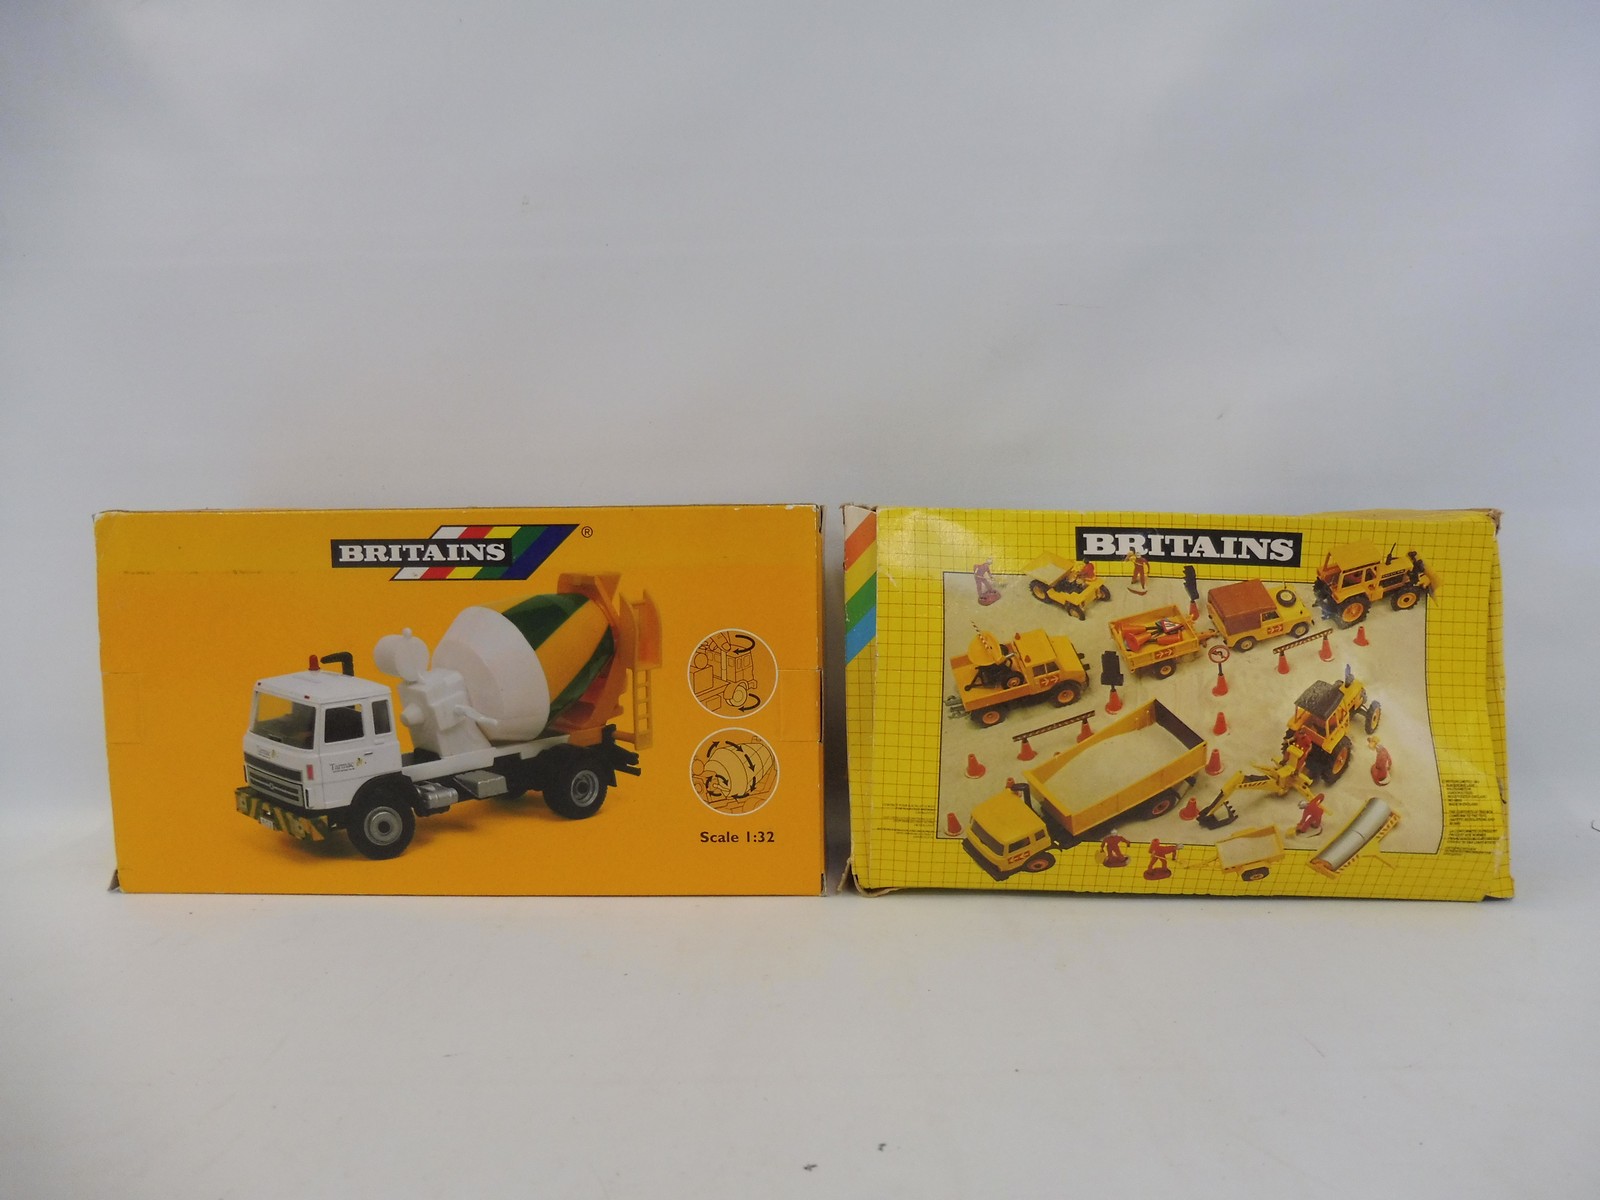 Two boxed Britains Farm Implements and Accessories - no. 9841 and 40745 Tarmac Concrete Mixer lorry. - Image 3 of 3